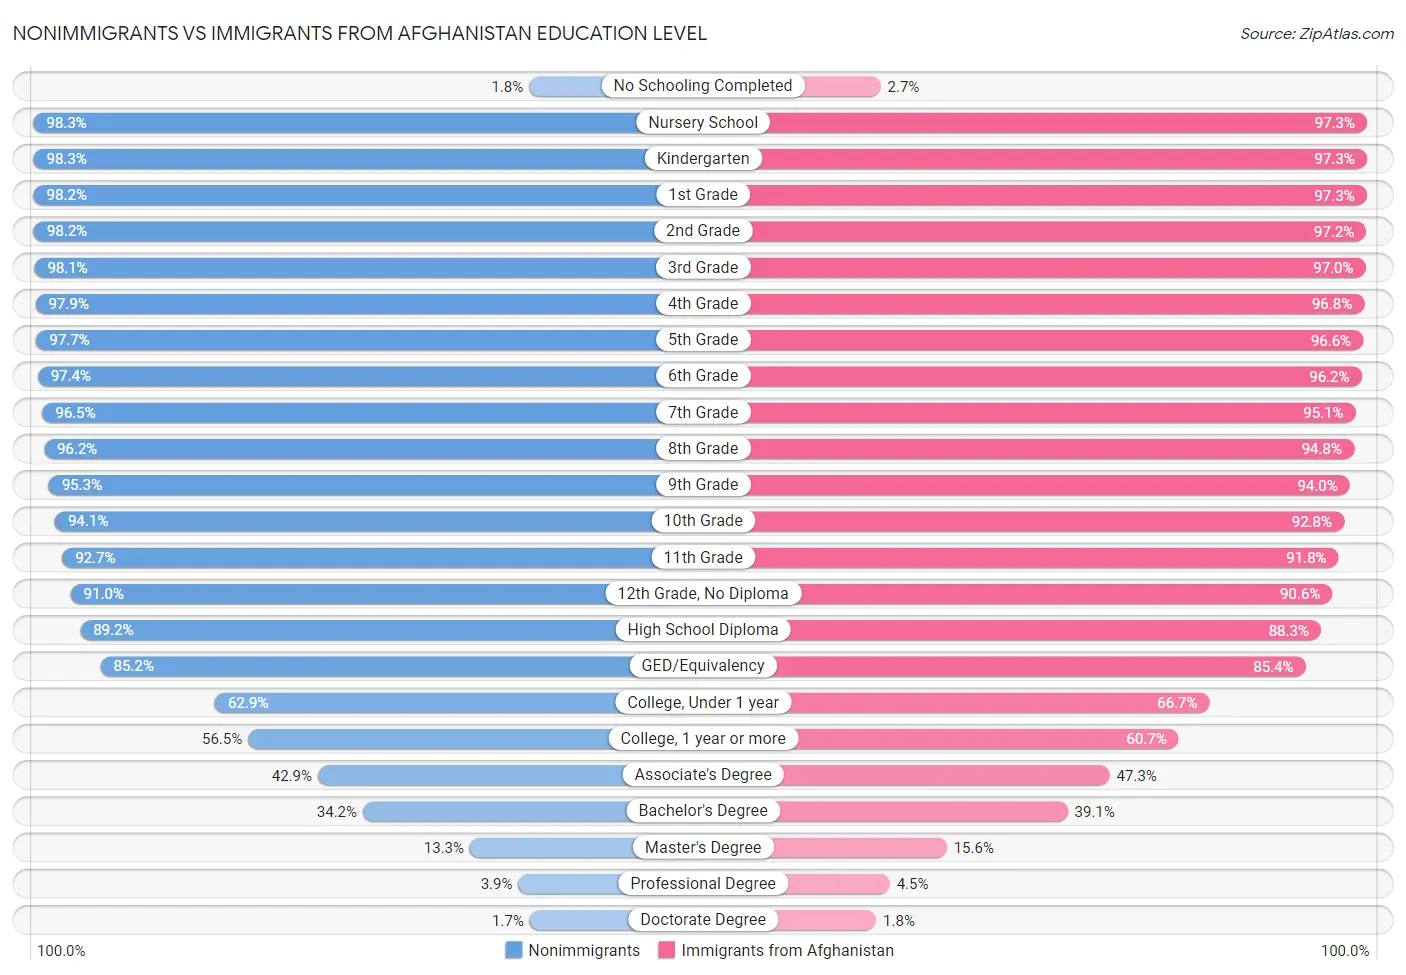 Nonimmigrants vs Immigrants from Afghanistan Education Level